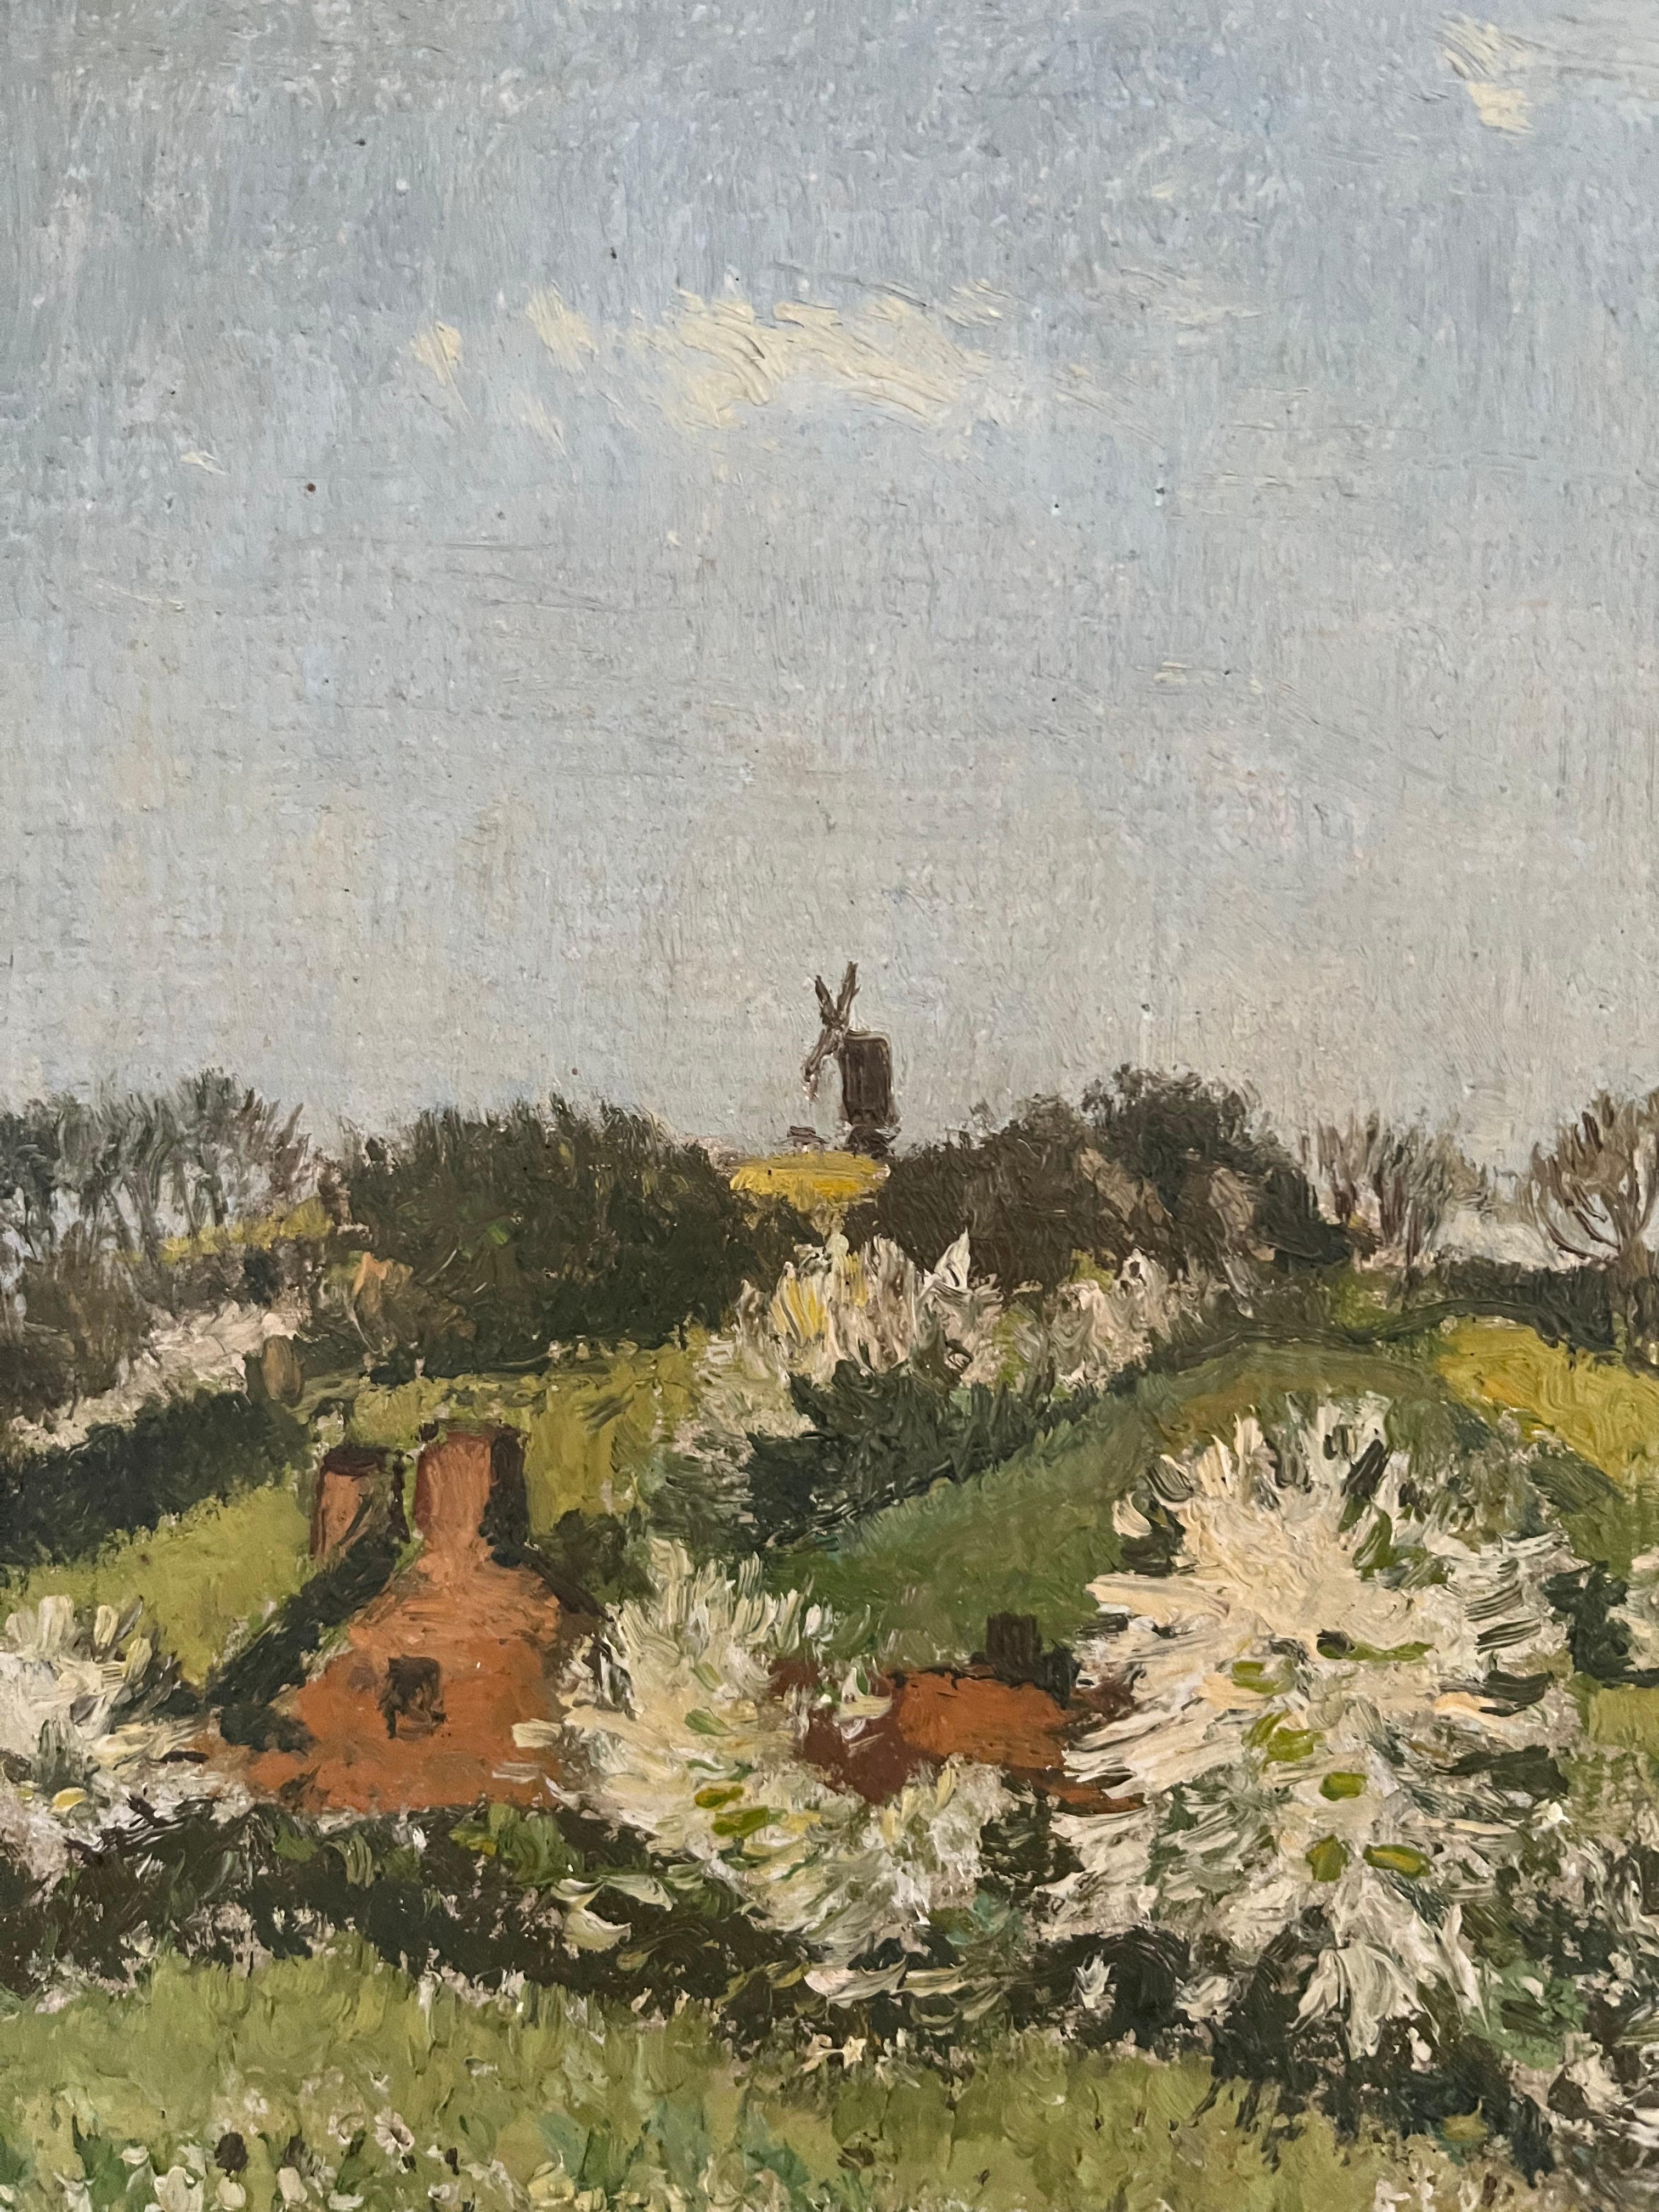 A really appealing view of the English countryside in the springtime with rolling hills, cattle grazing in lush pasture and a windmill off in the distance.

George Graham (1881-1949)
Springtime
Signed and dated 1948
Oil on canvas laid down on